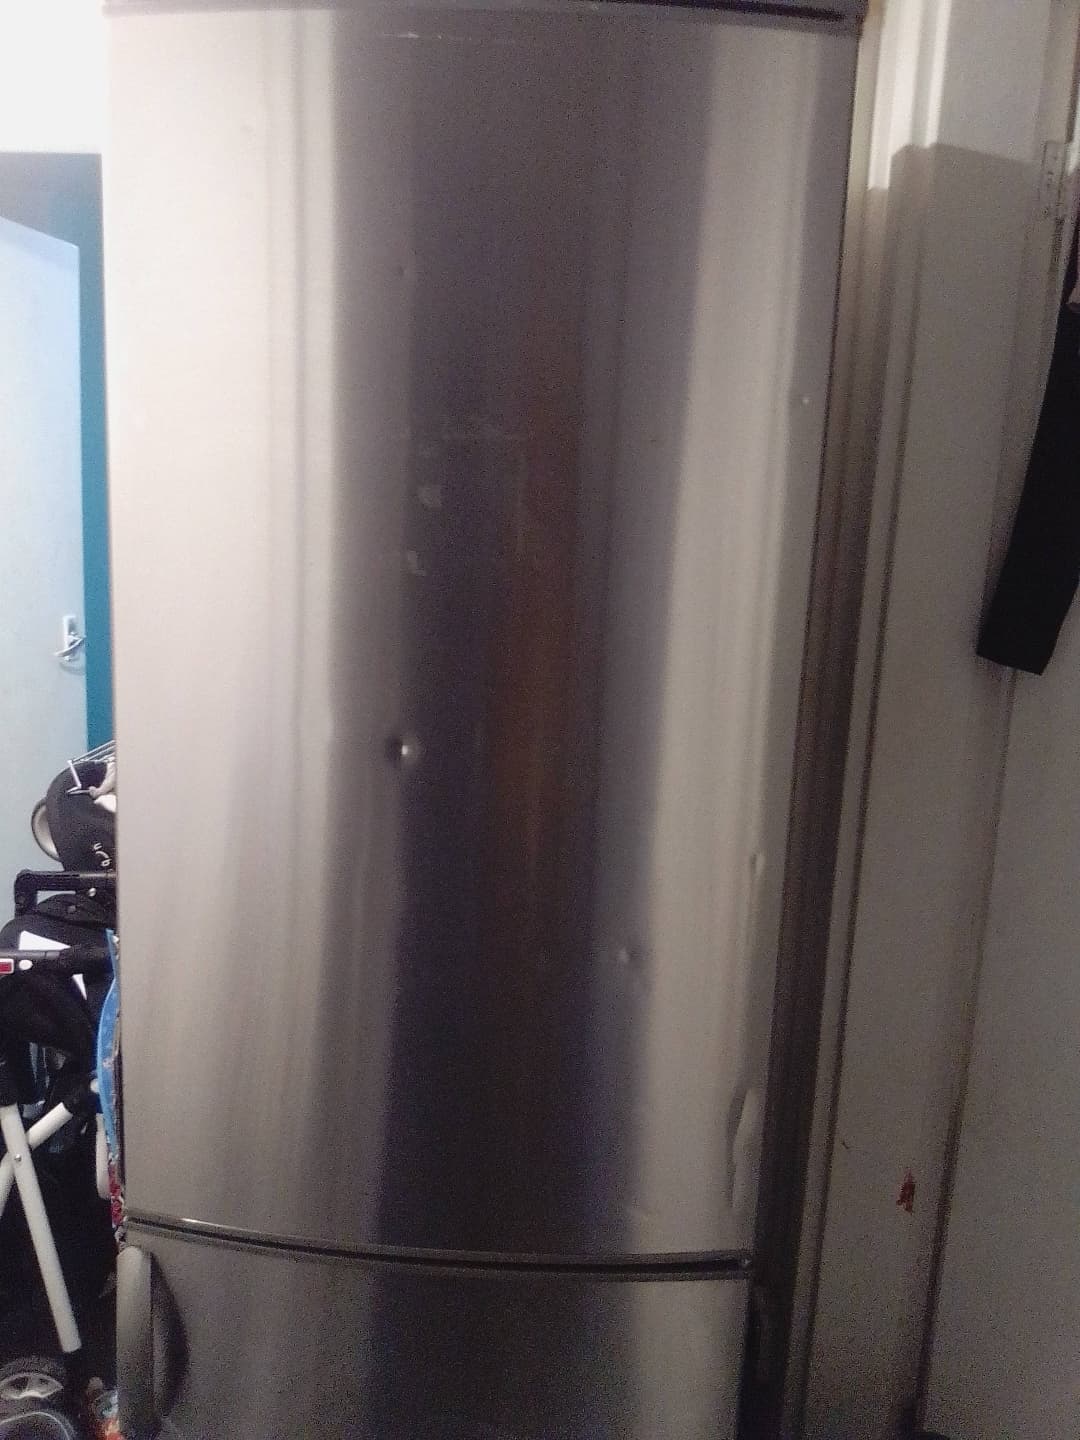 £50 old fridge ready for collection